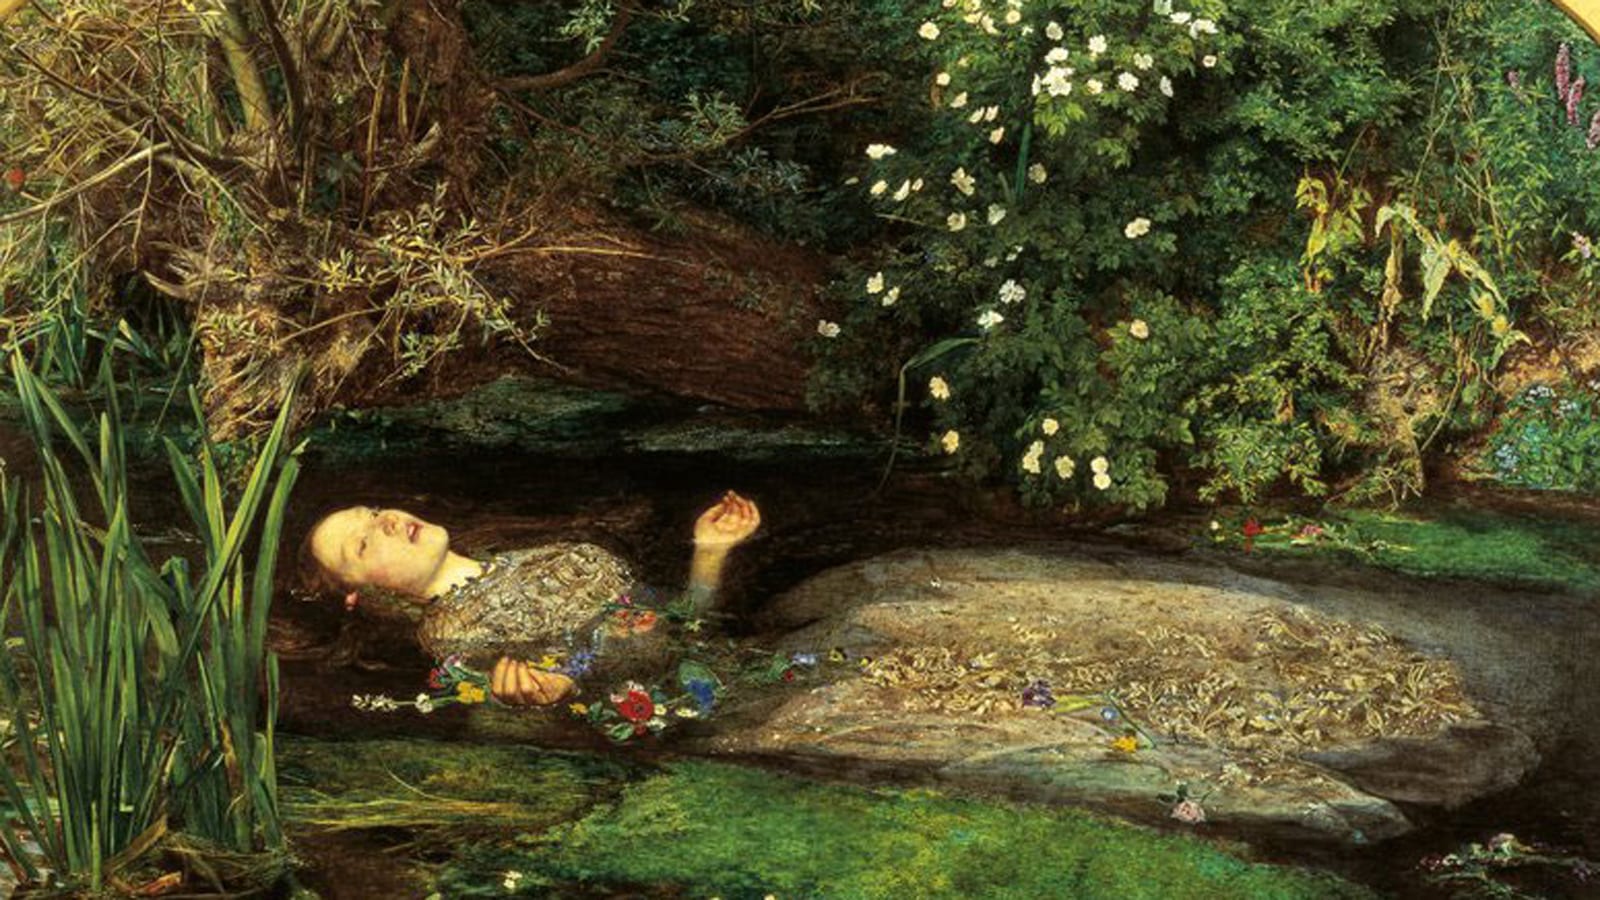 A painting of Ophelia drowning in Hamlet